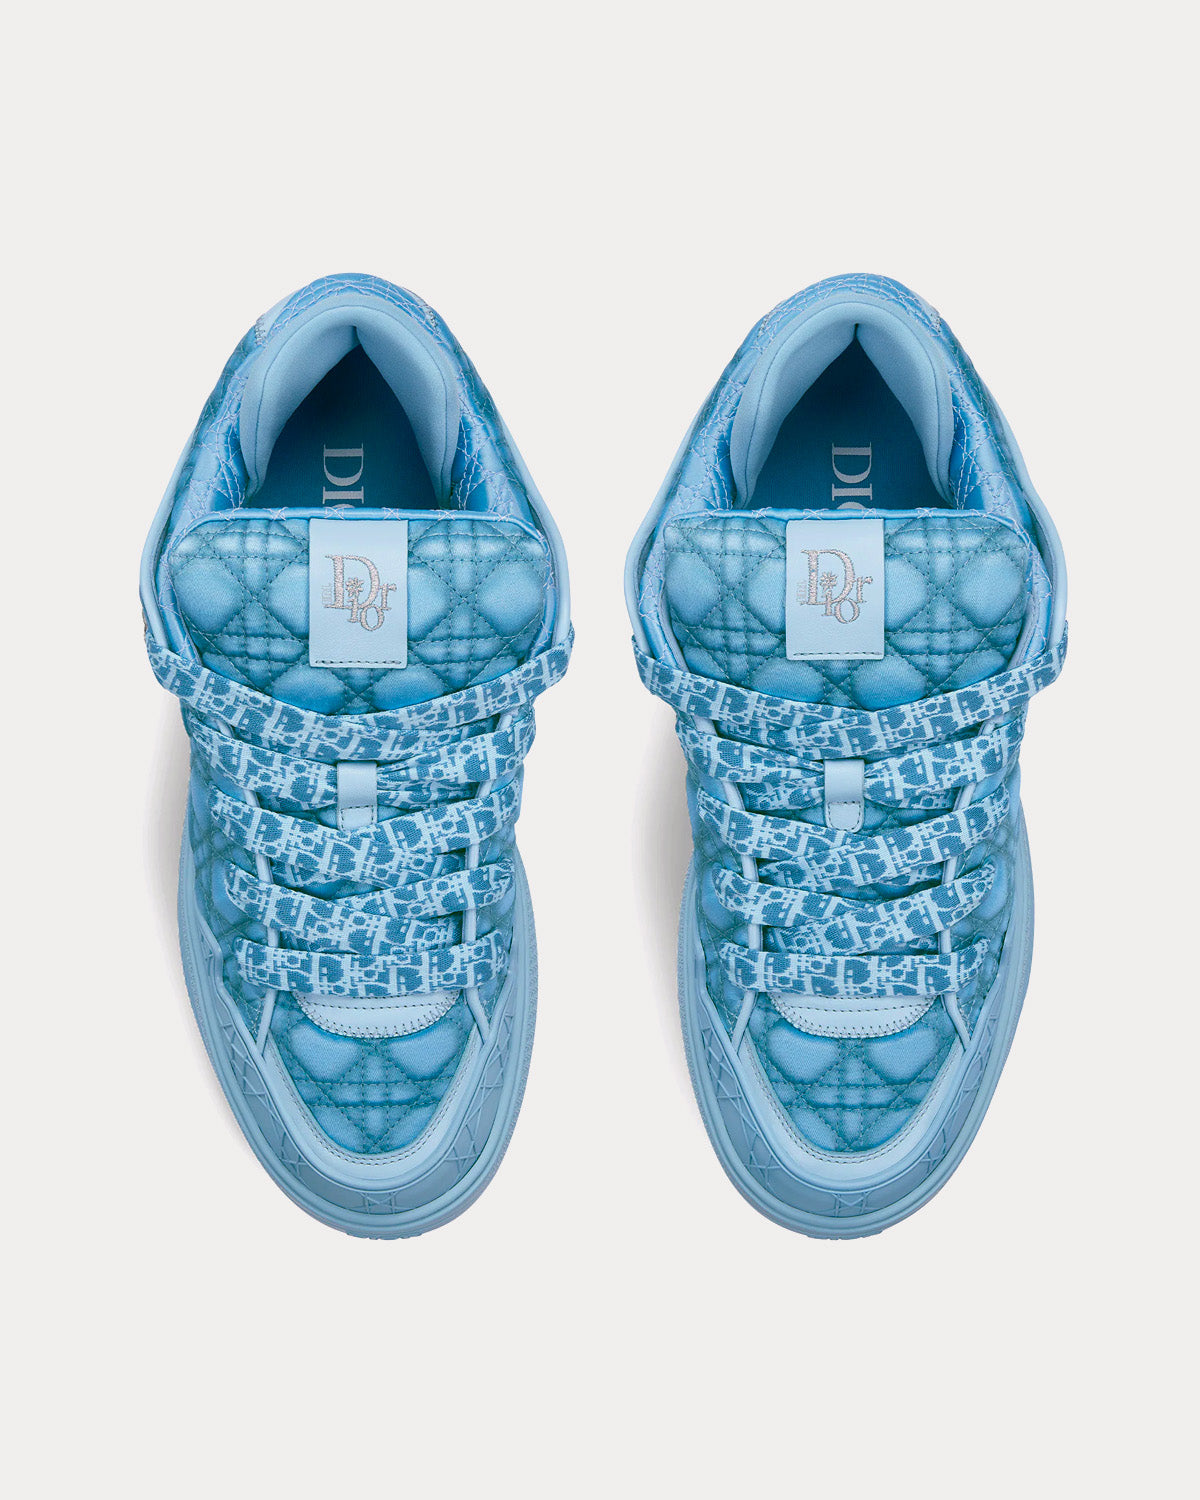 Dior x ERL - B9S Skater Limited And Numbered Edition Blue Kumo Cannage Satin Low Top Sneakers